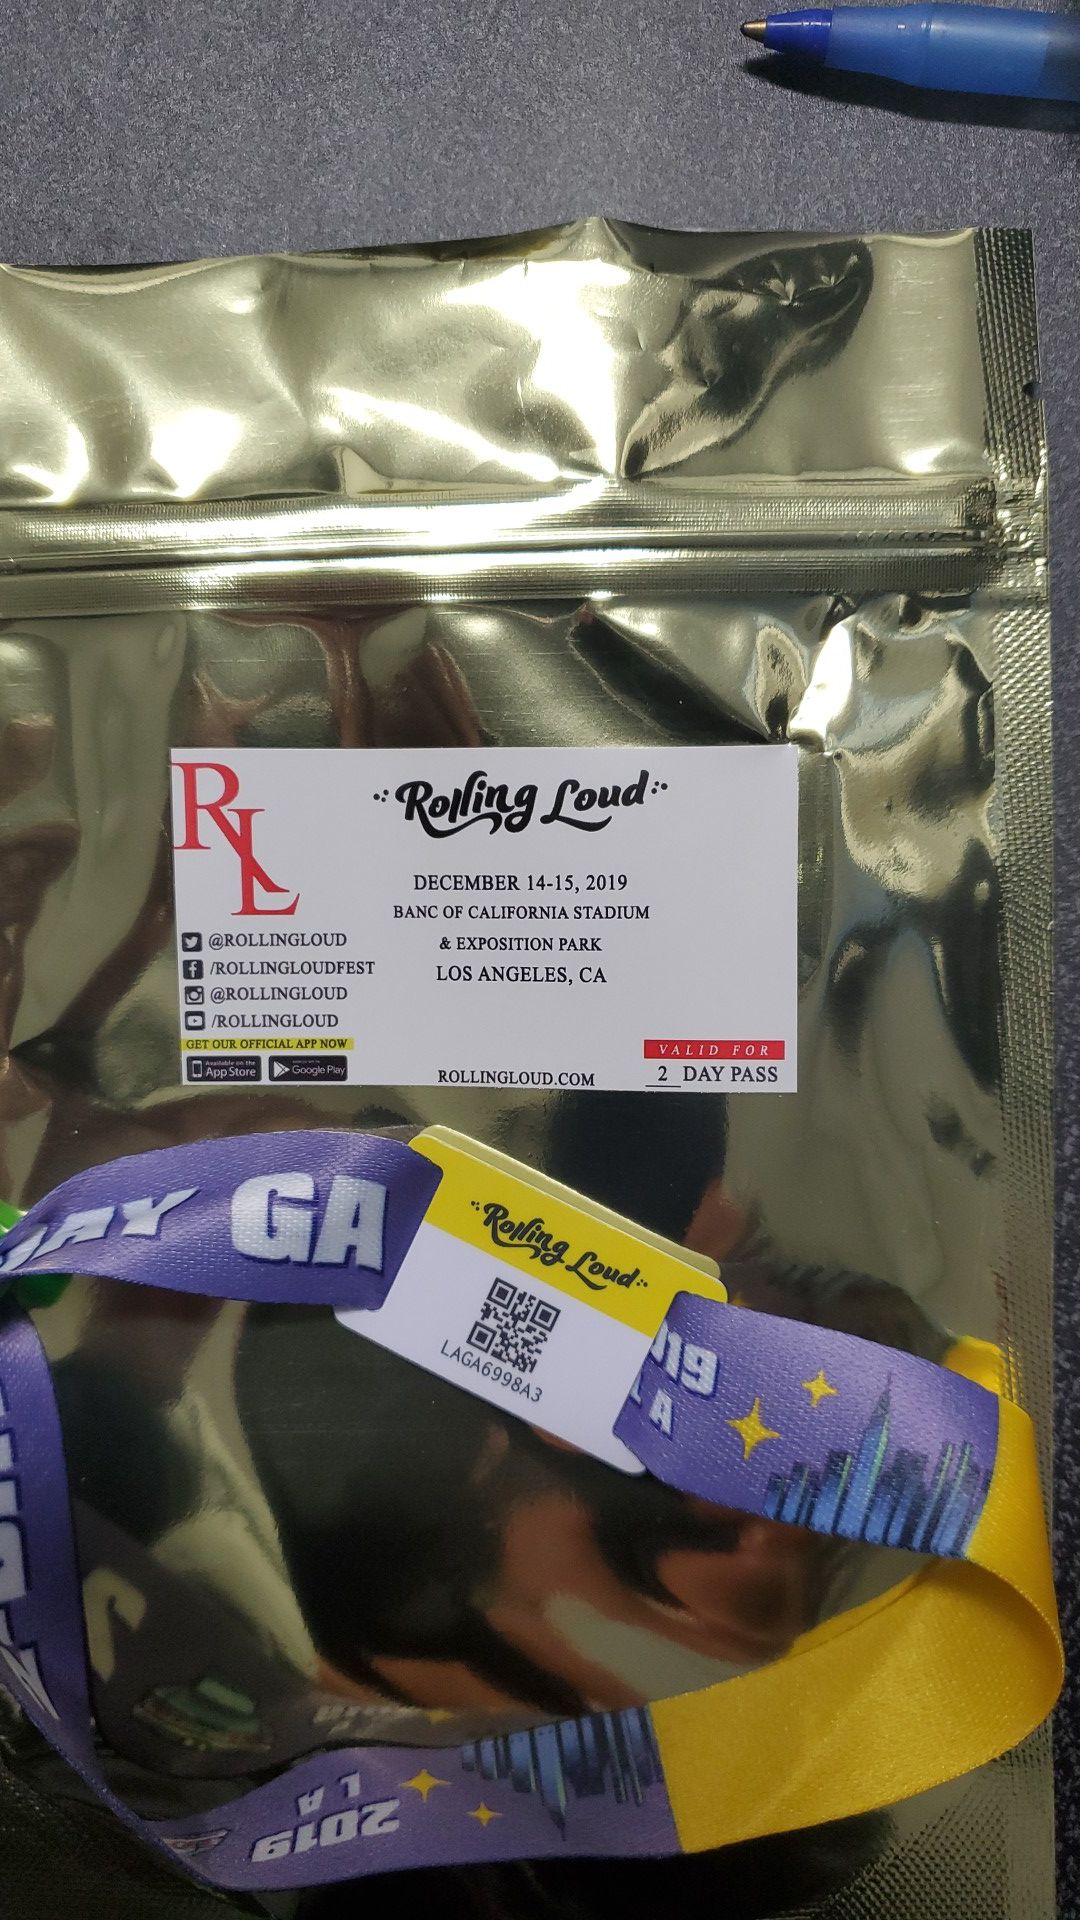 Rolling loud 2 day pass Dec.14-15, 2019